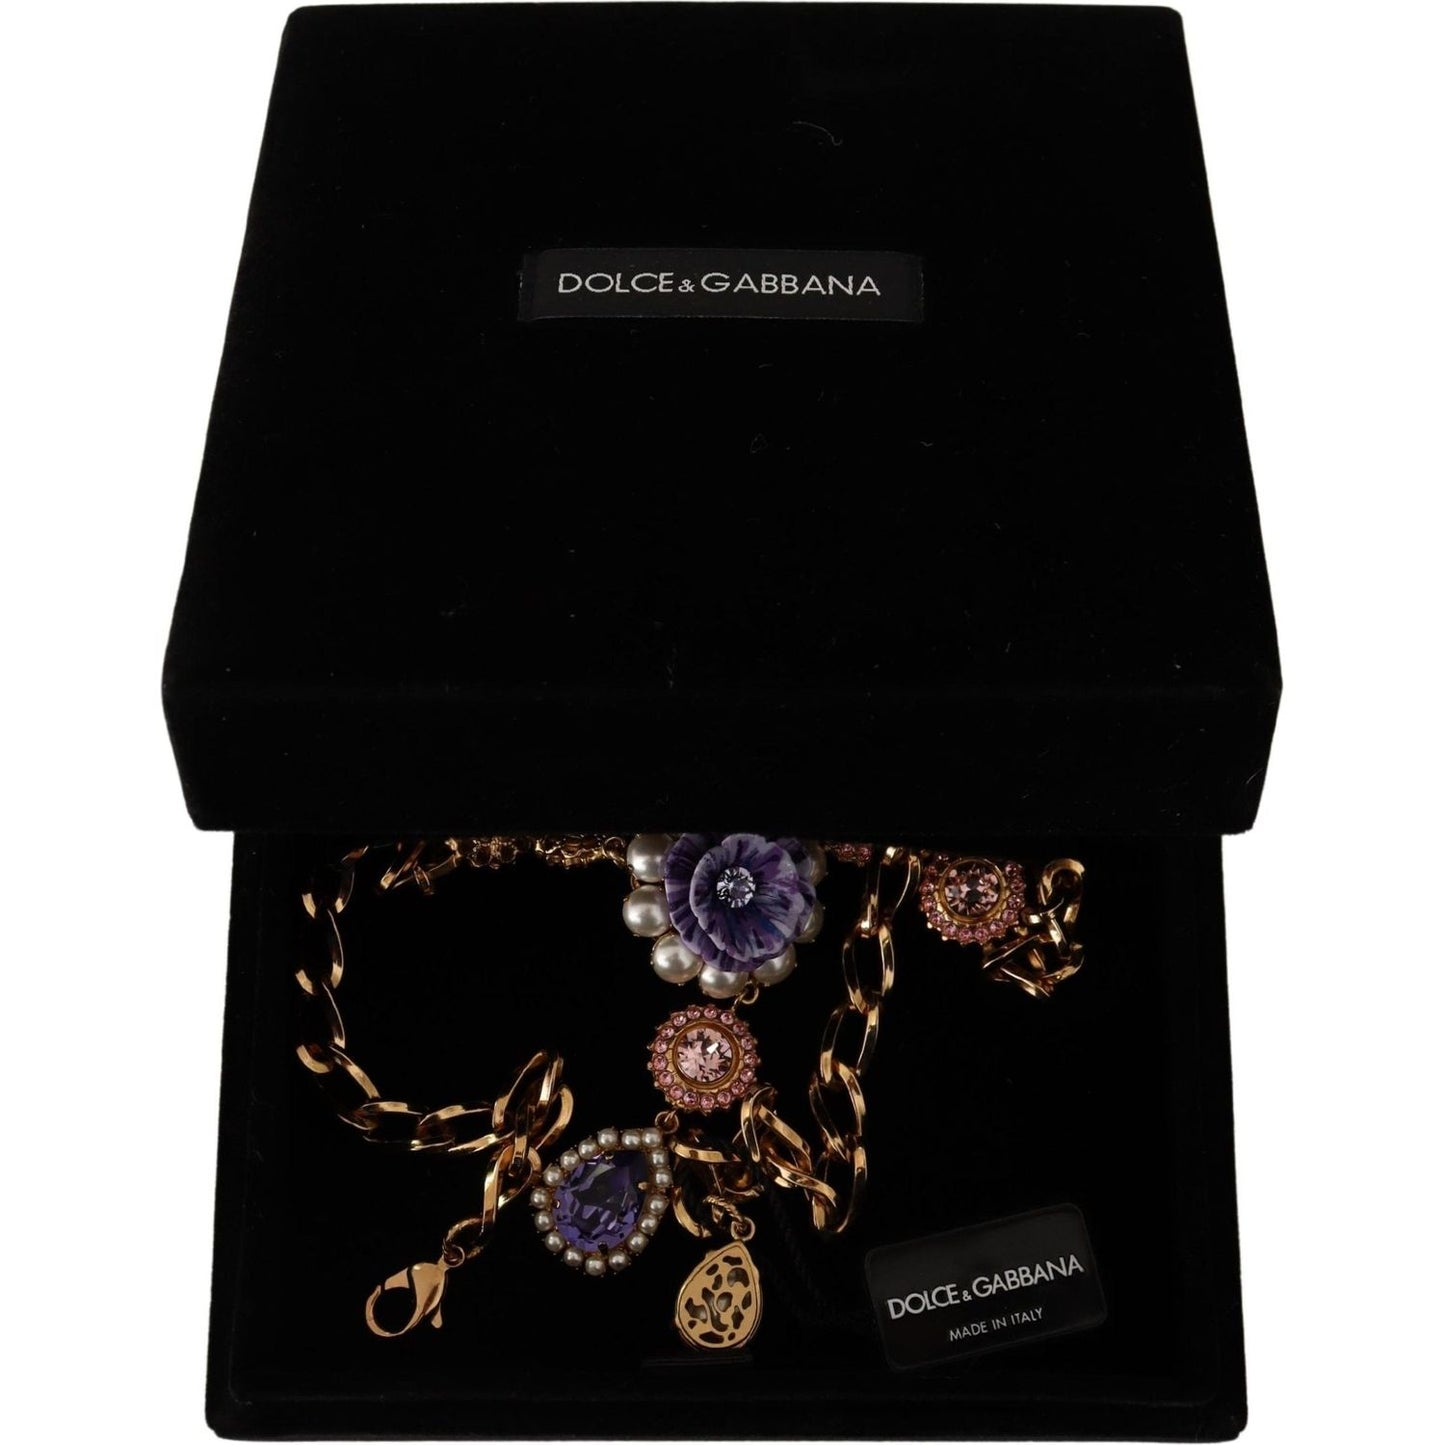 Dolce & Gabbana Elegant Floral Crystal Statement Necklace gold-brass-crystal-purple-pink-pearl-pendants-necklace WOMAN NECKLACE IMG_1970-b76252a2-0a3.jpg